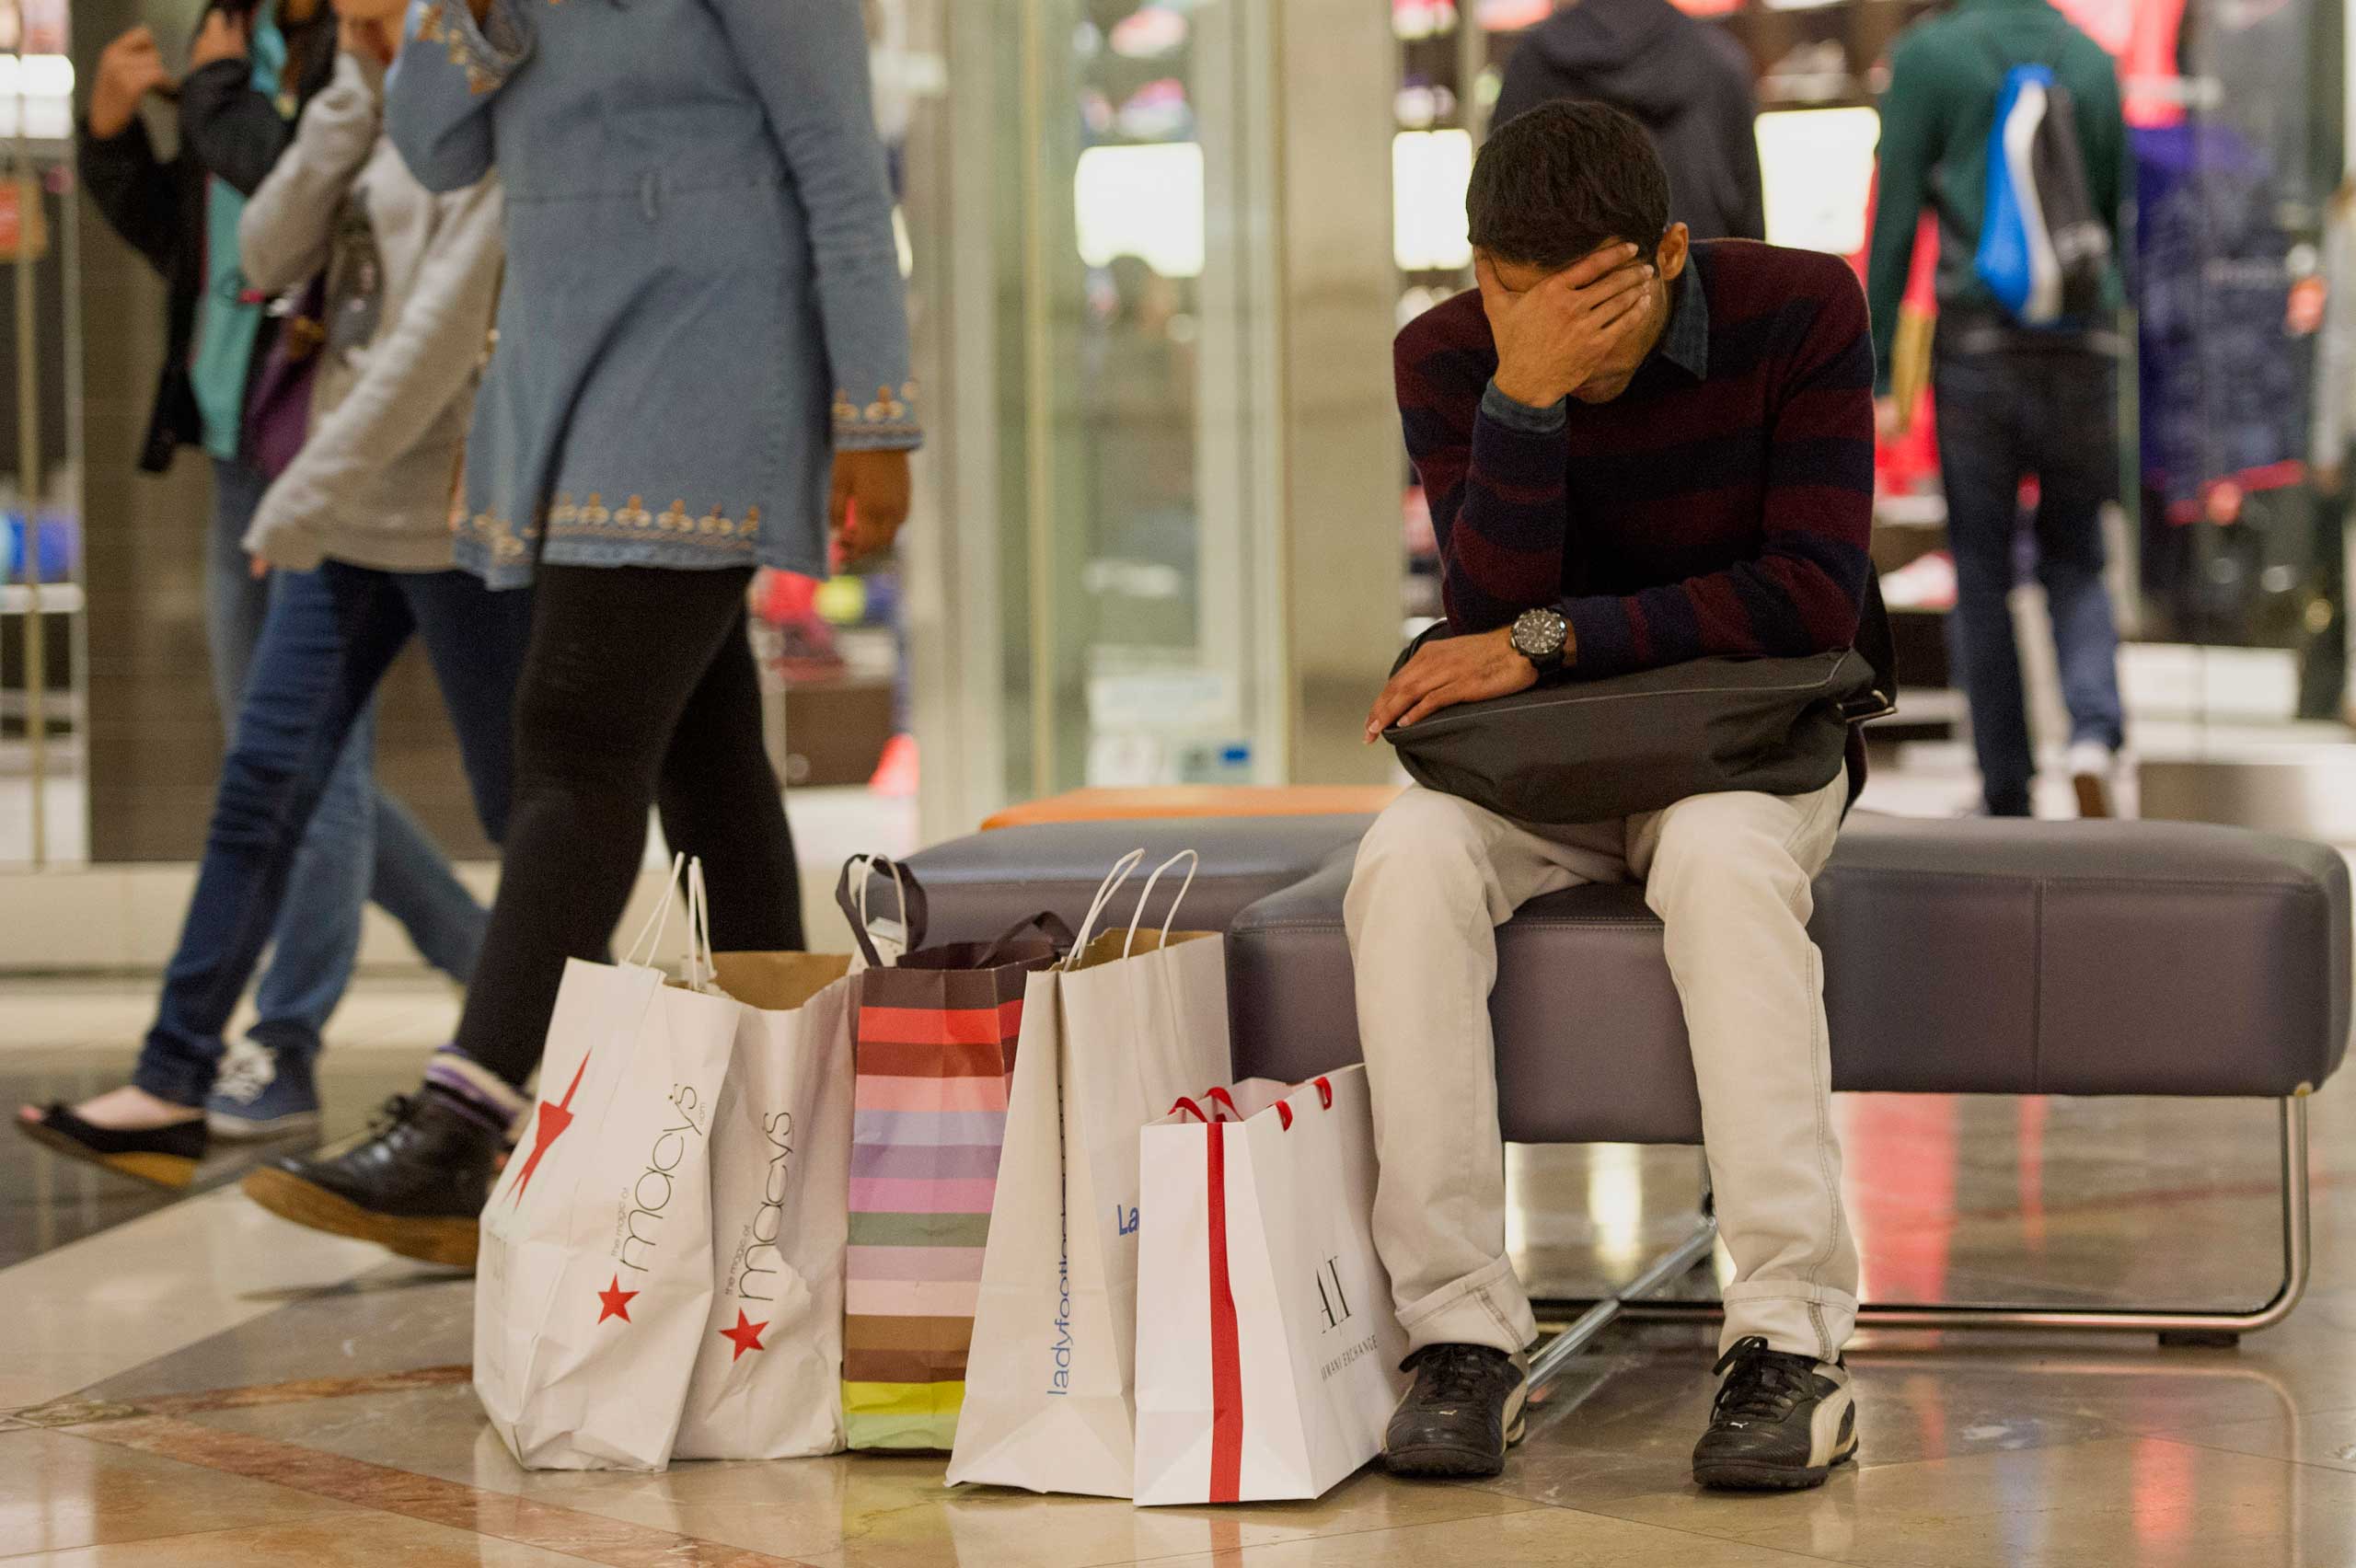 A man takes a break from shopping inside the Westfield San Francisco Centre on Black Friday in San Francisco, Nov. 28, 2014. (David Paul Morris—Bloomberg/Getty Images)